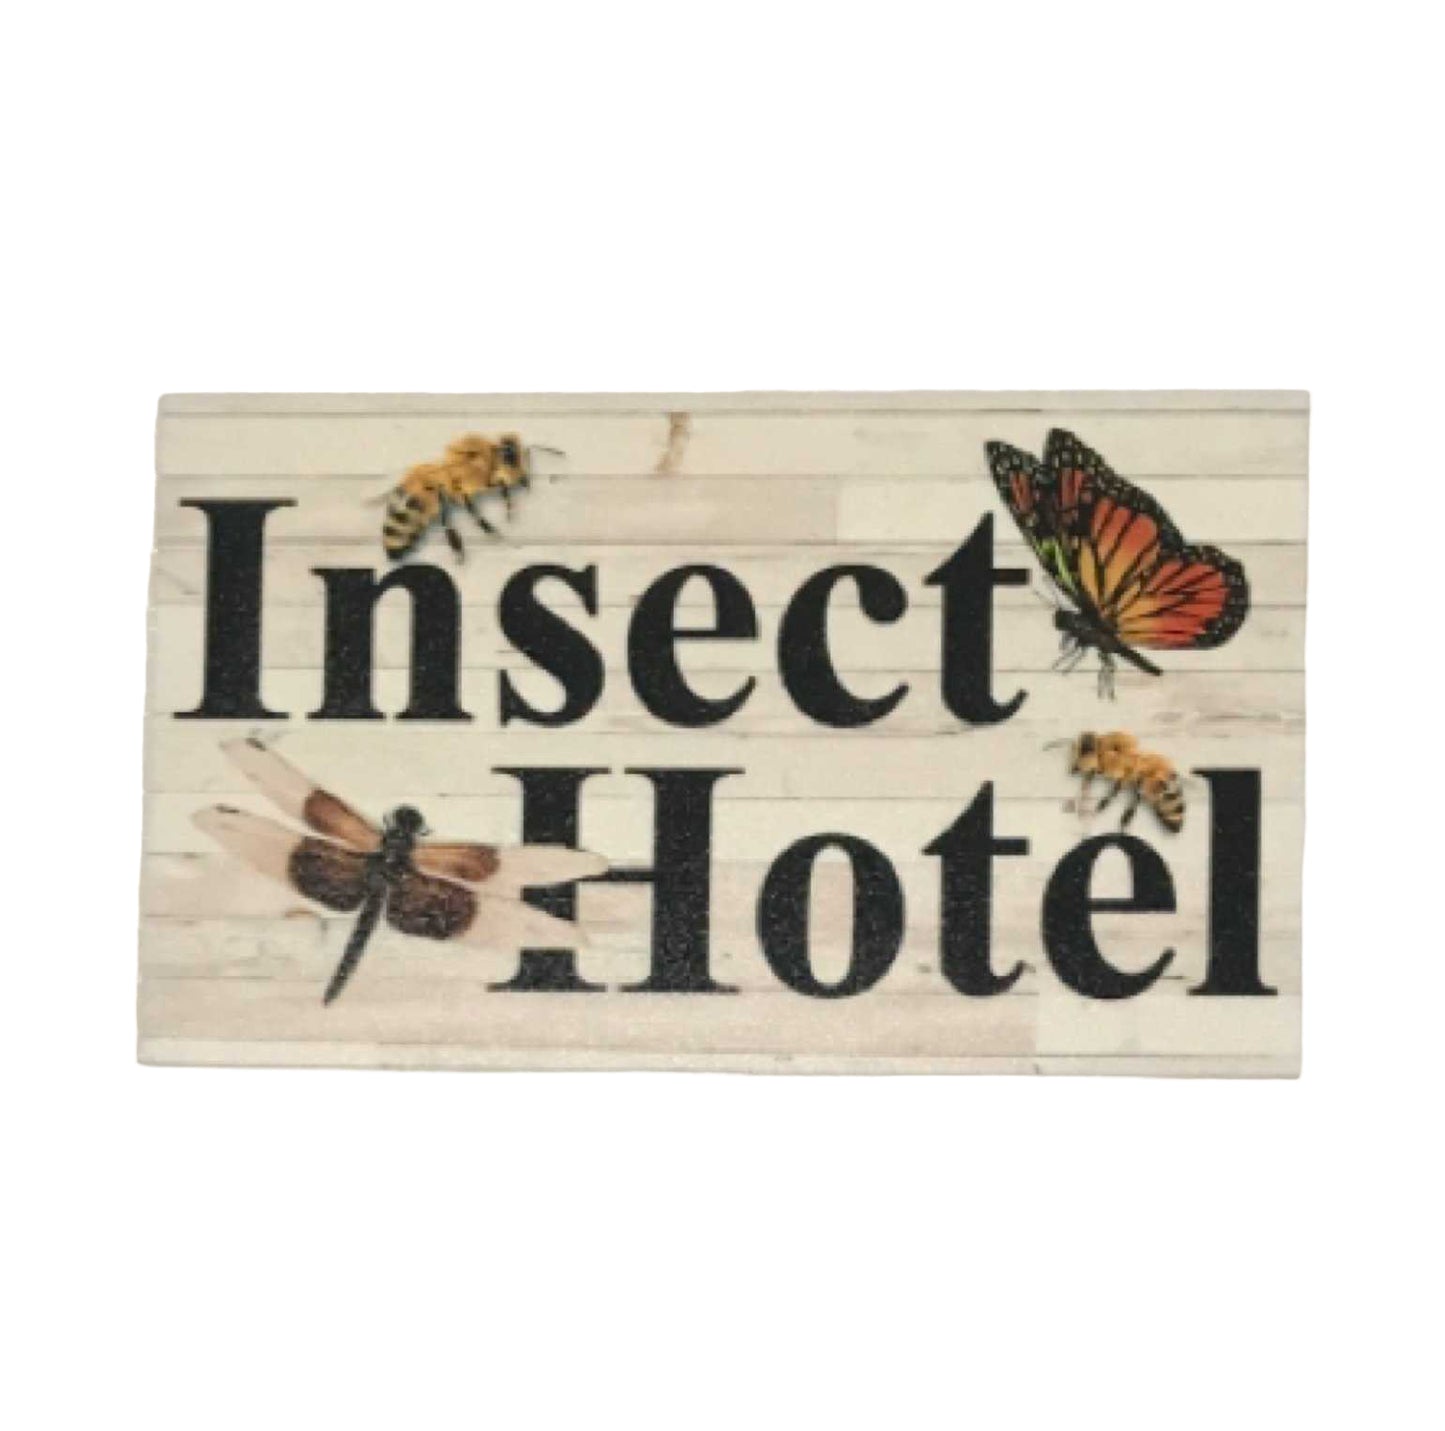 Insect Hotel Garden Sign - The Renmy Store Homewares & Gifts 